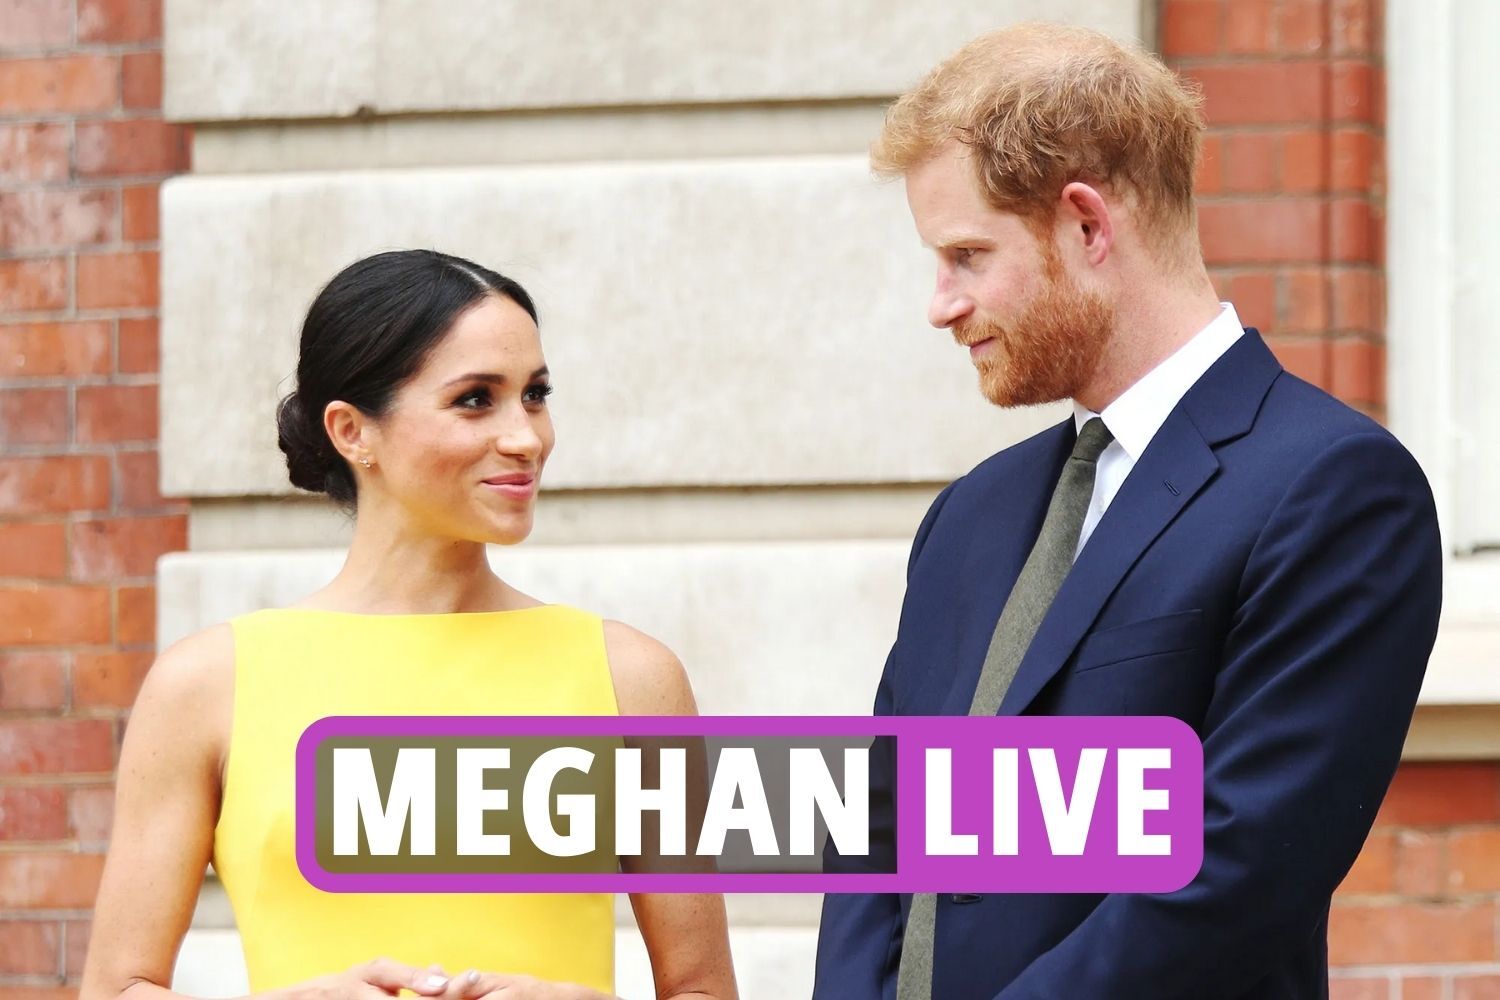 Sussexes 'PERPLEXING' content could be contributing to Netflix's 'devaluation'